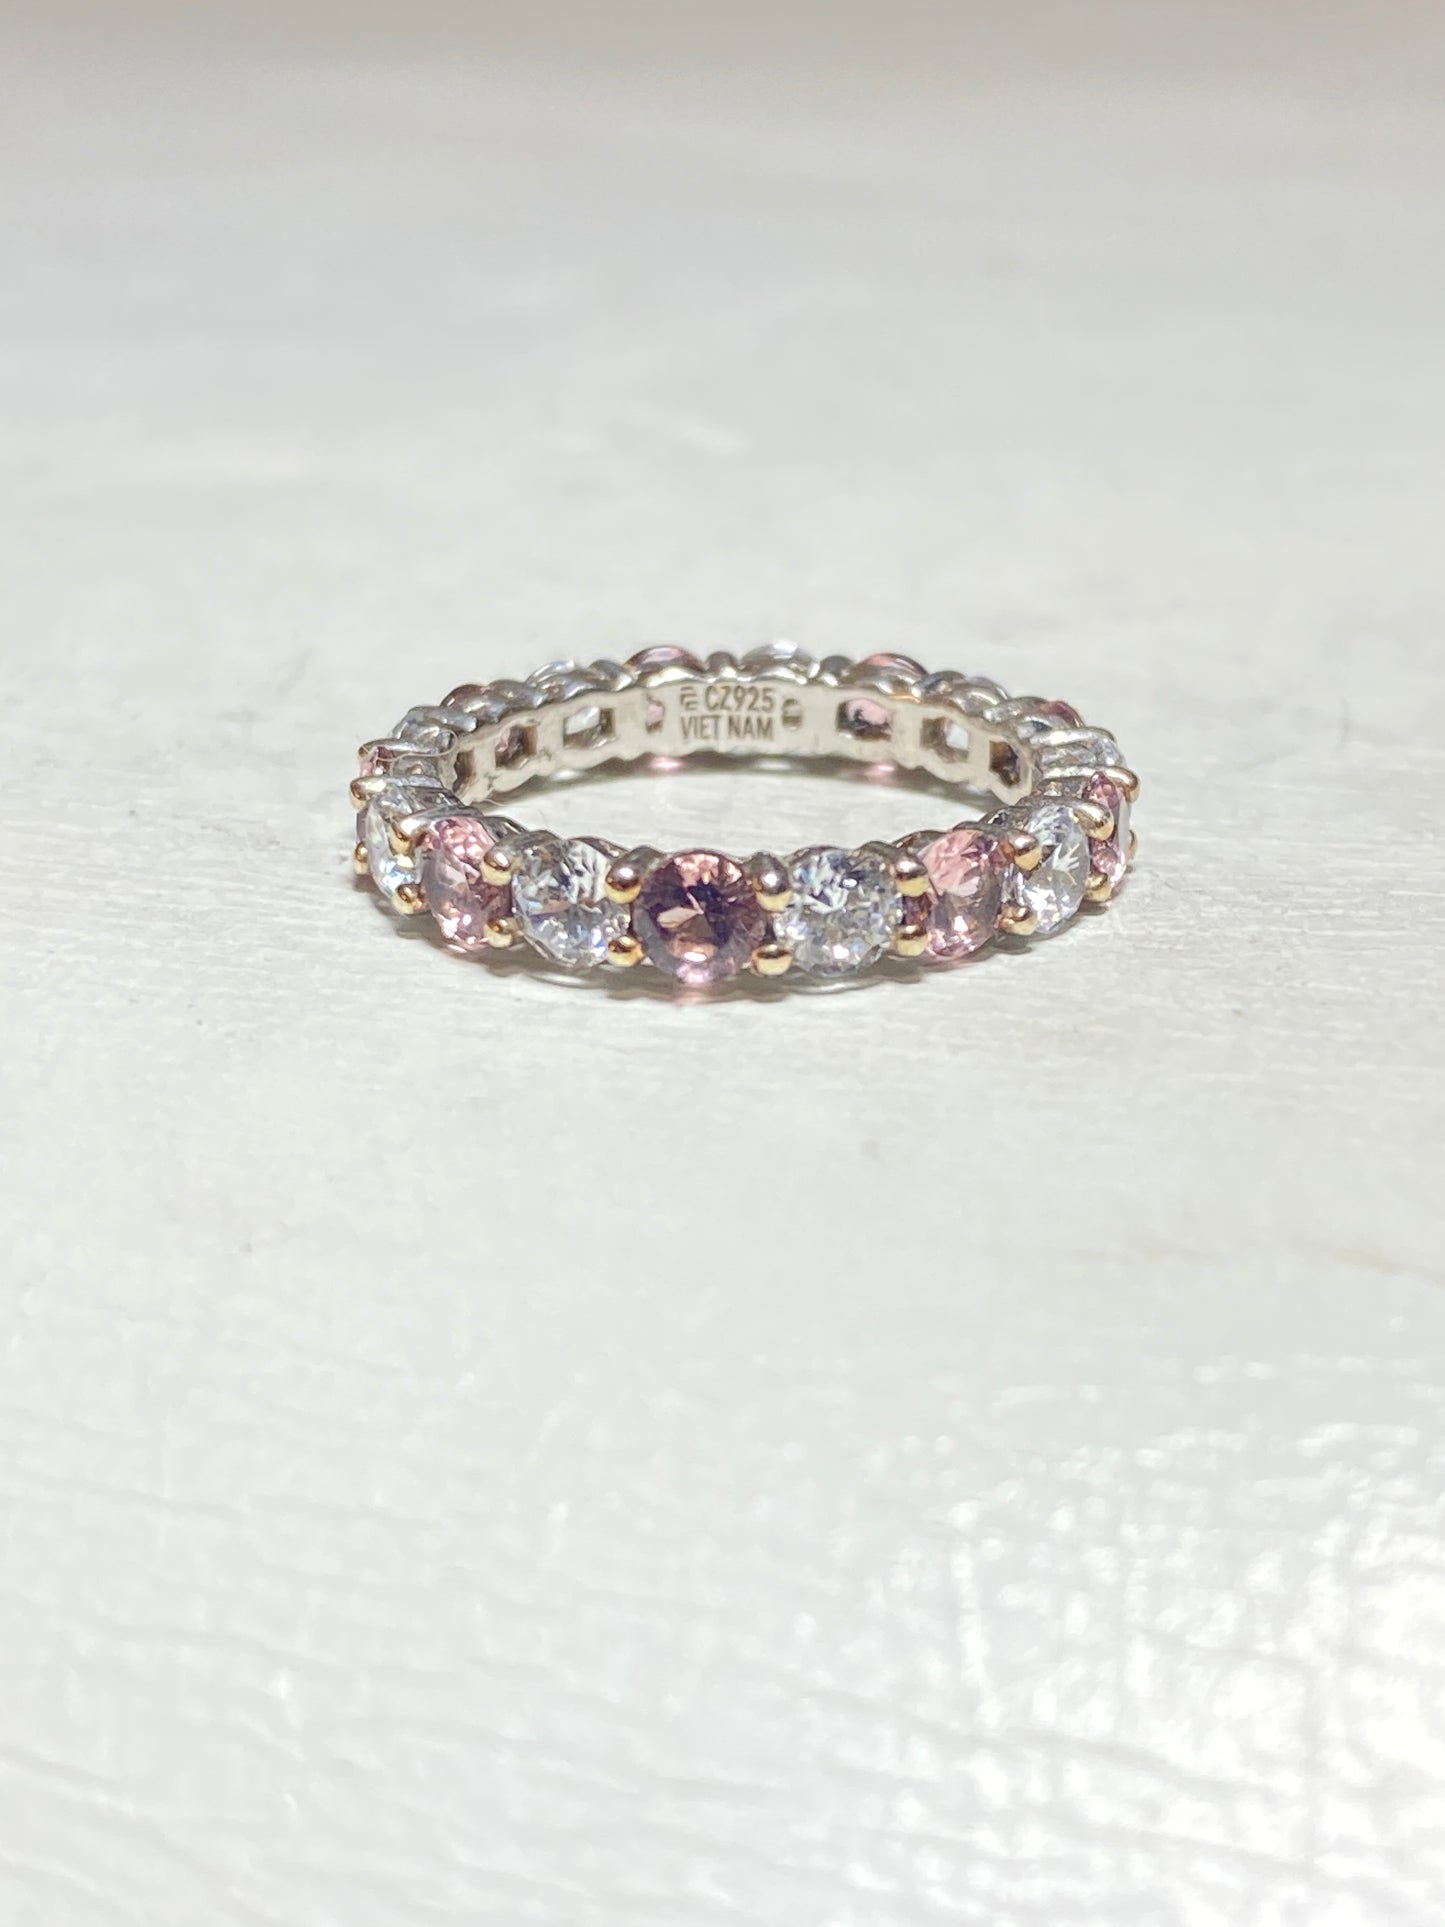 Eternity band clear pink clear CZ crystal stacker band ring sterling silver women girls